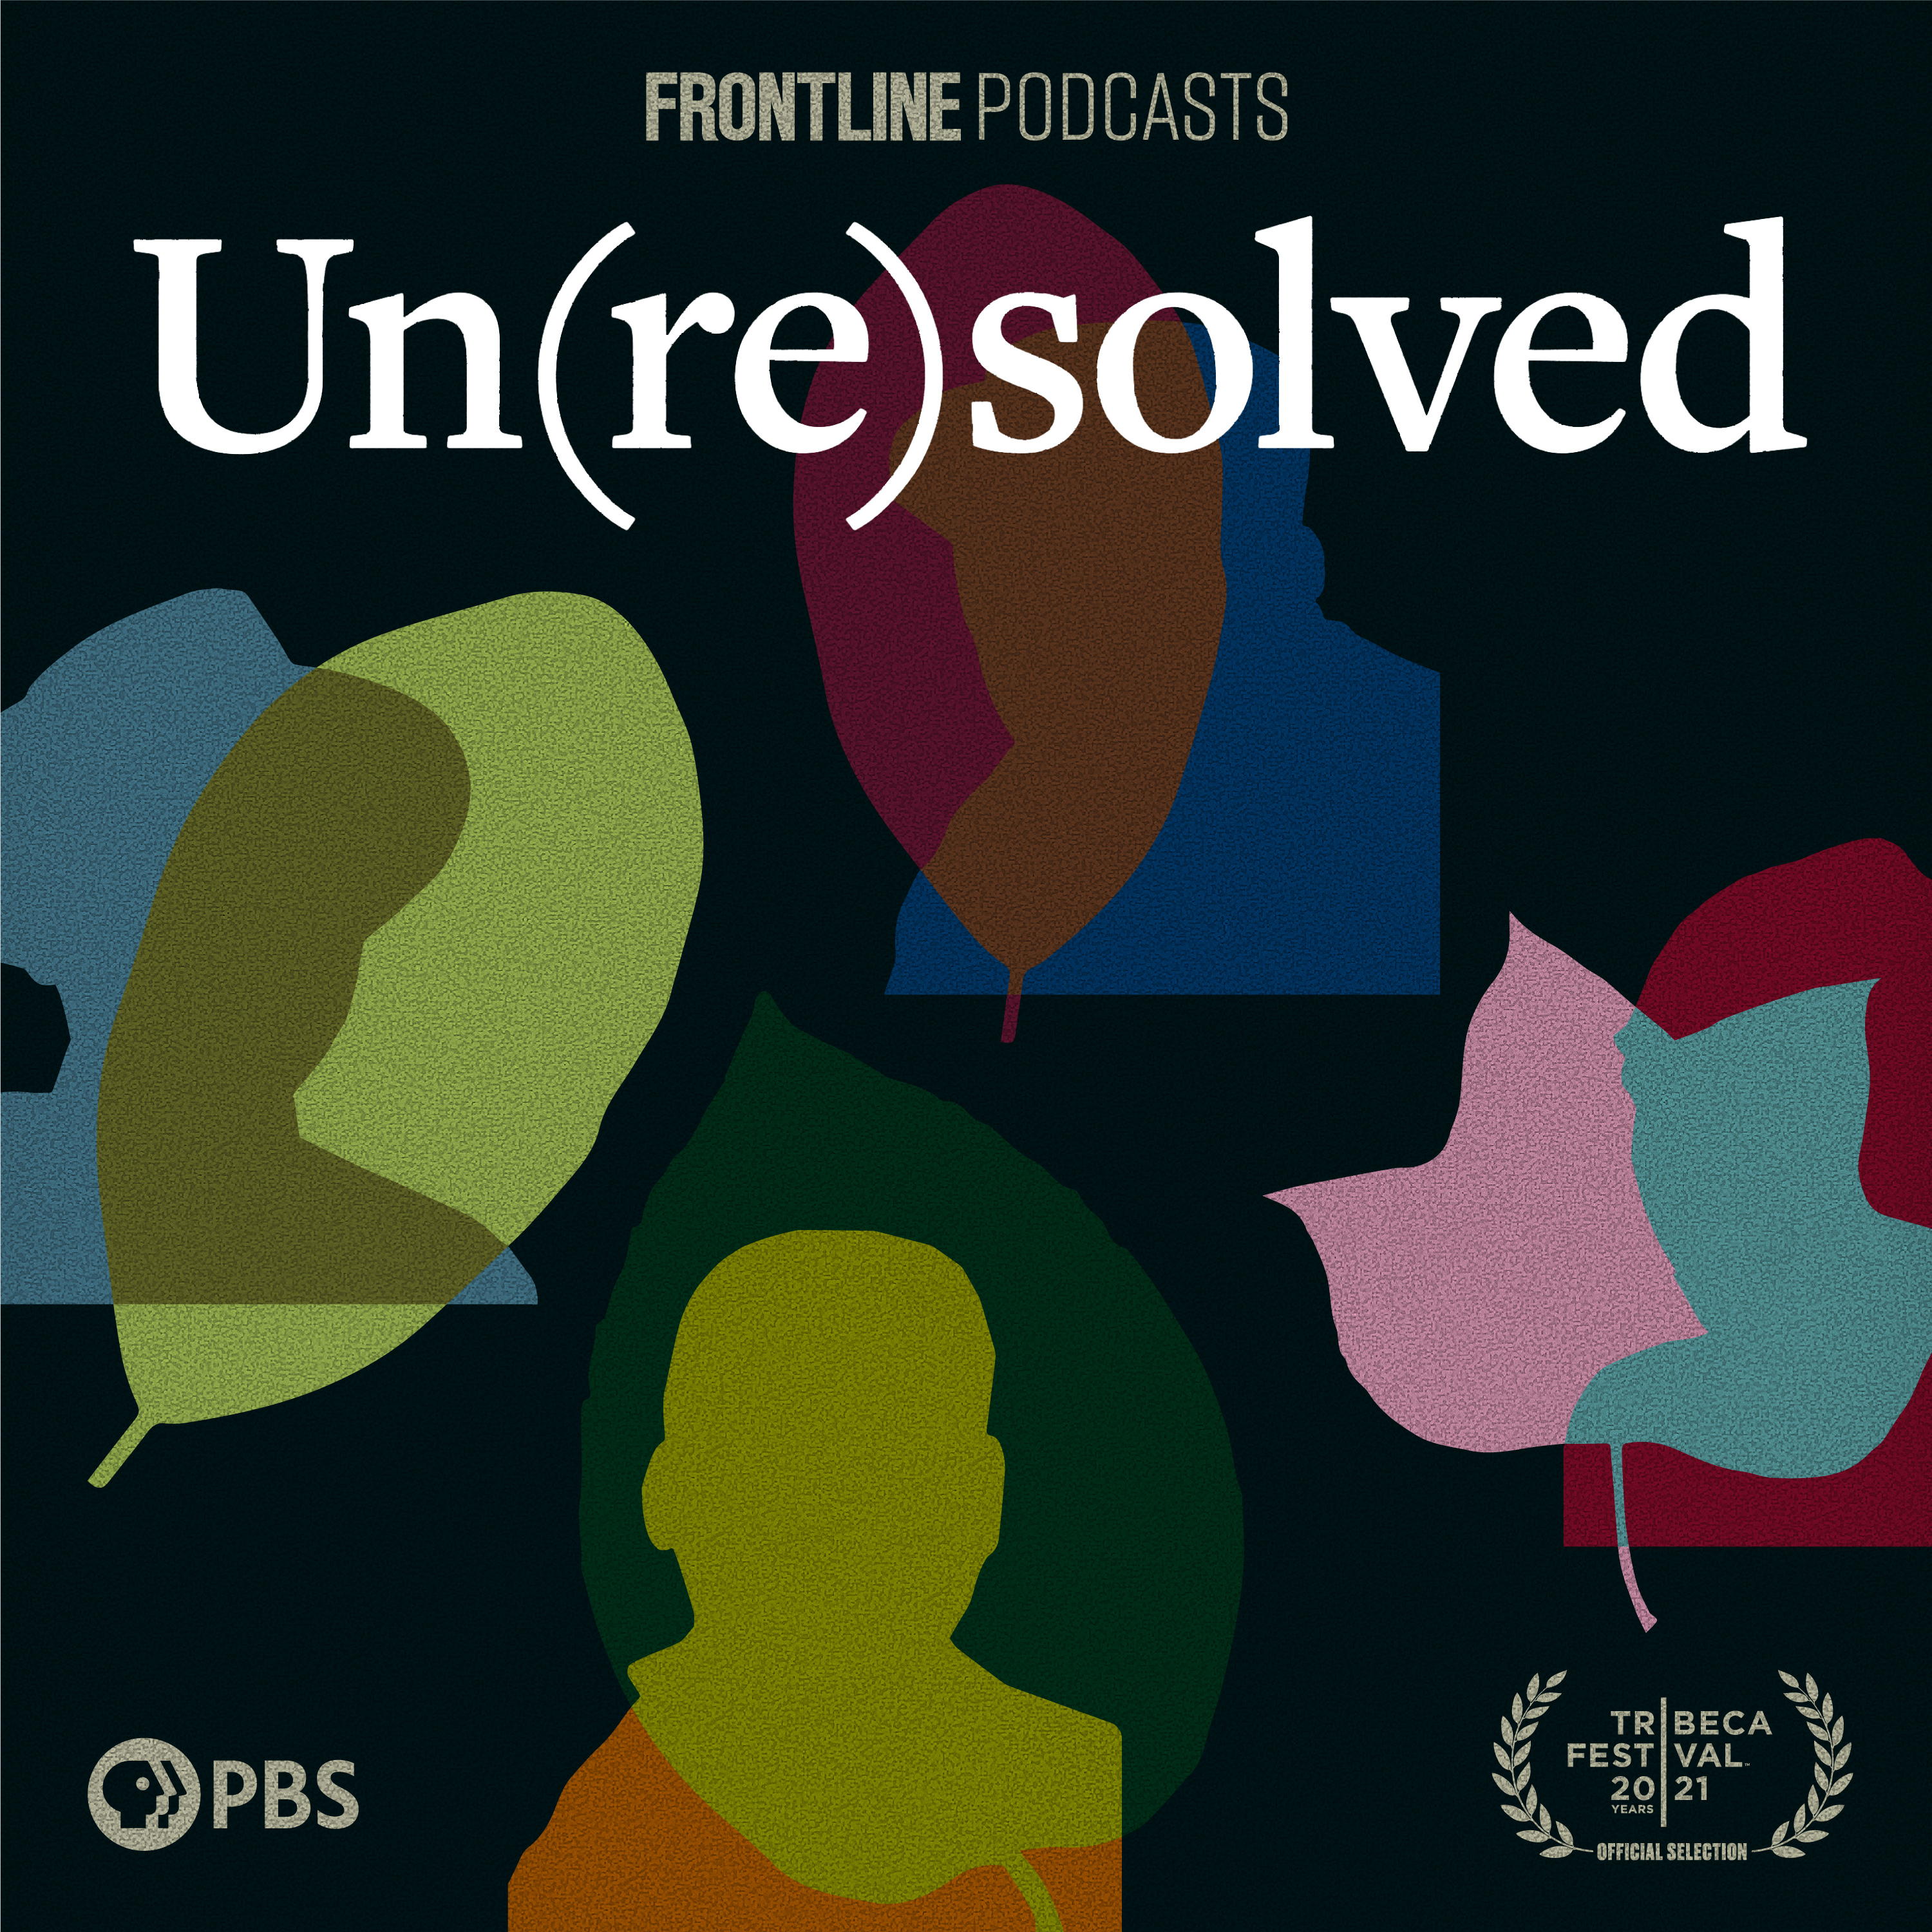 Introducing: Un(re)solved